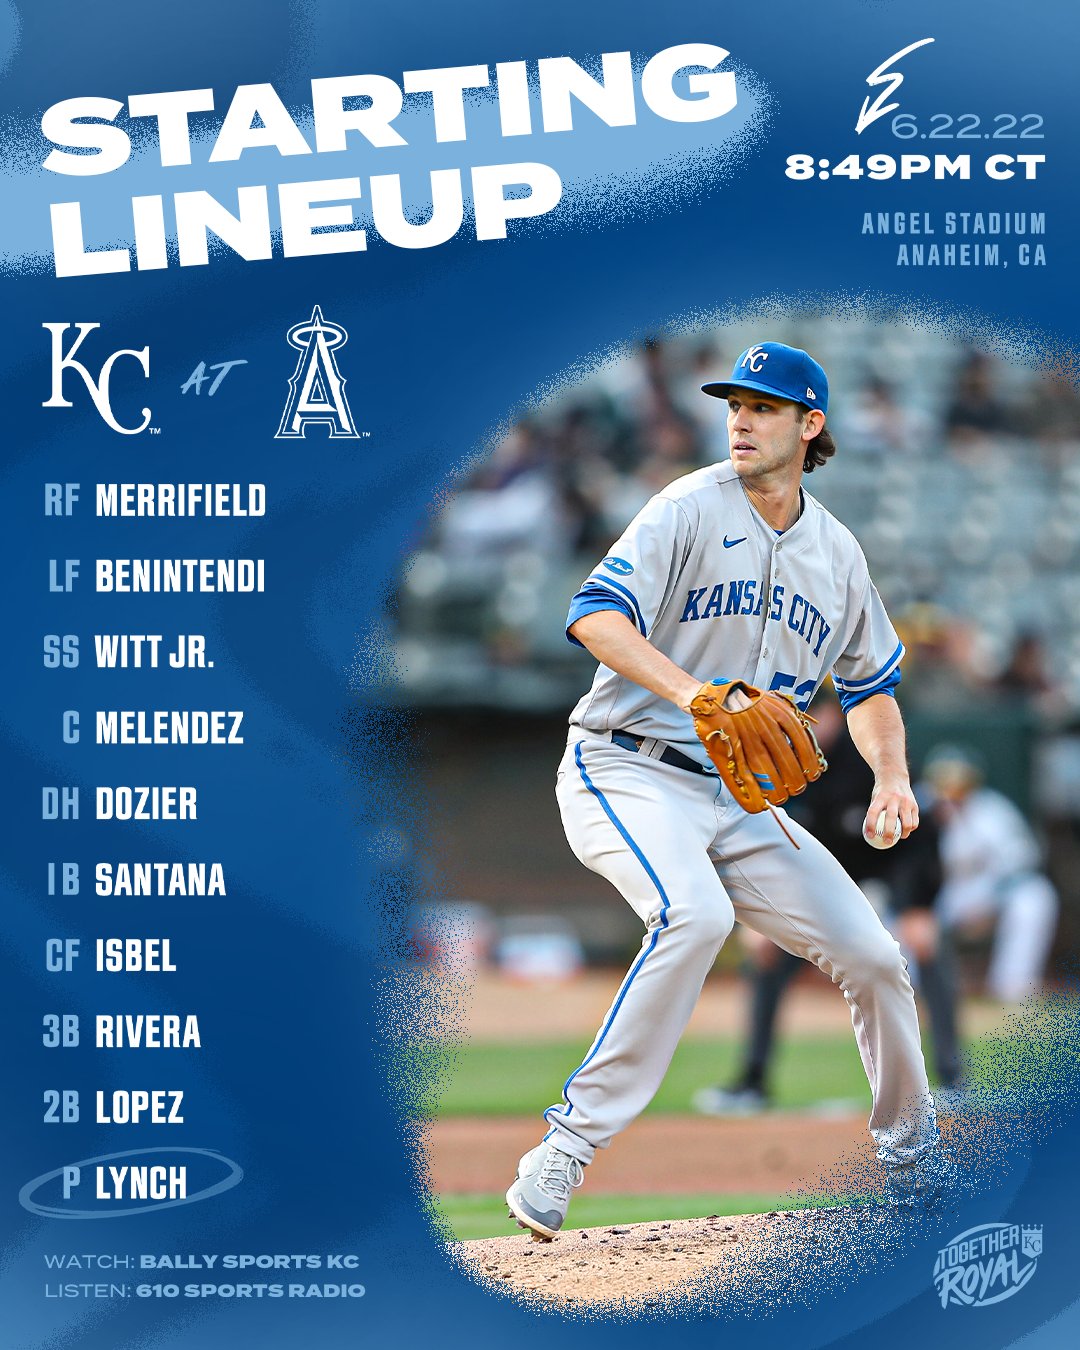 The Royals lineup for June 22 at the Los Angeles Angels:

RF Whit Merrifield
LF Andrew Benintendi
SS Bobby Witt Jr.
C MJ Melendez
DH Hunter Dozier
1B Carlos Santana
CF Kyle Isbel
3B Emmanuel Rivera
2B Nicky Lopez

P Daniel Lynch

Broadcasts of tonight's game will be available on Bally Sports KC and KCSP 610 AM.

First pitch from Angel Stadium in Anaheim, CA is set for 8:49 p.m. CT. Go Royals!

Inset photo: Daniel Lynch starts his pitching motion.